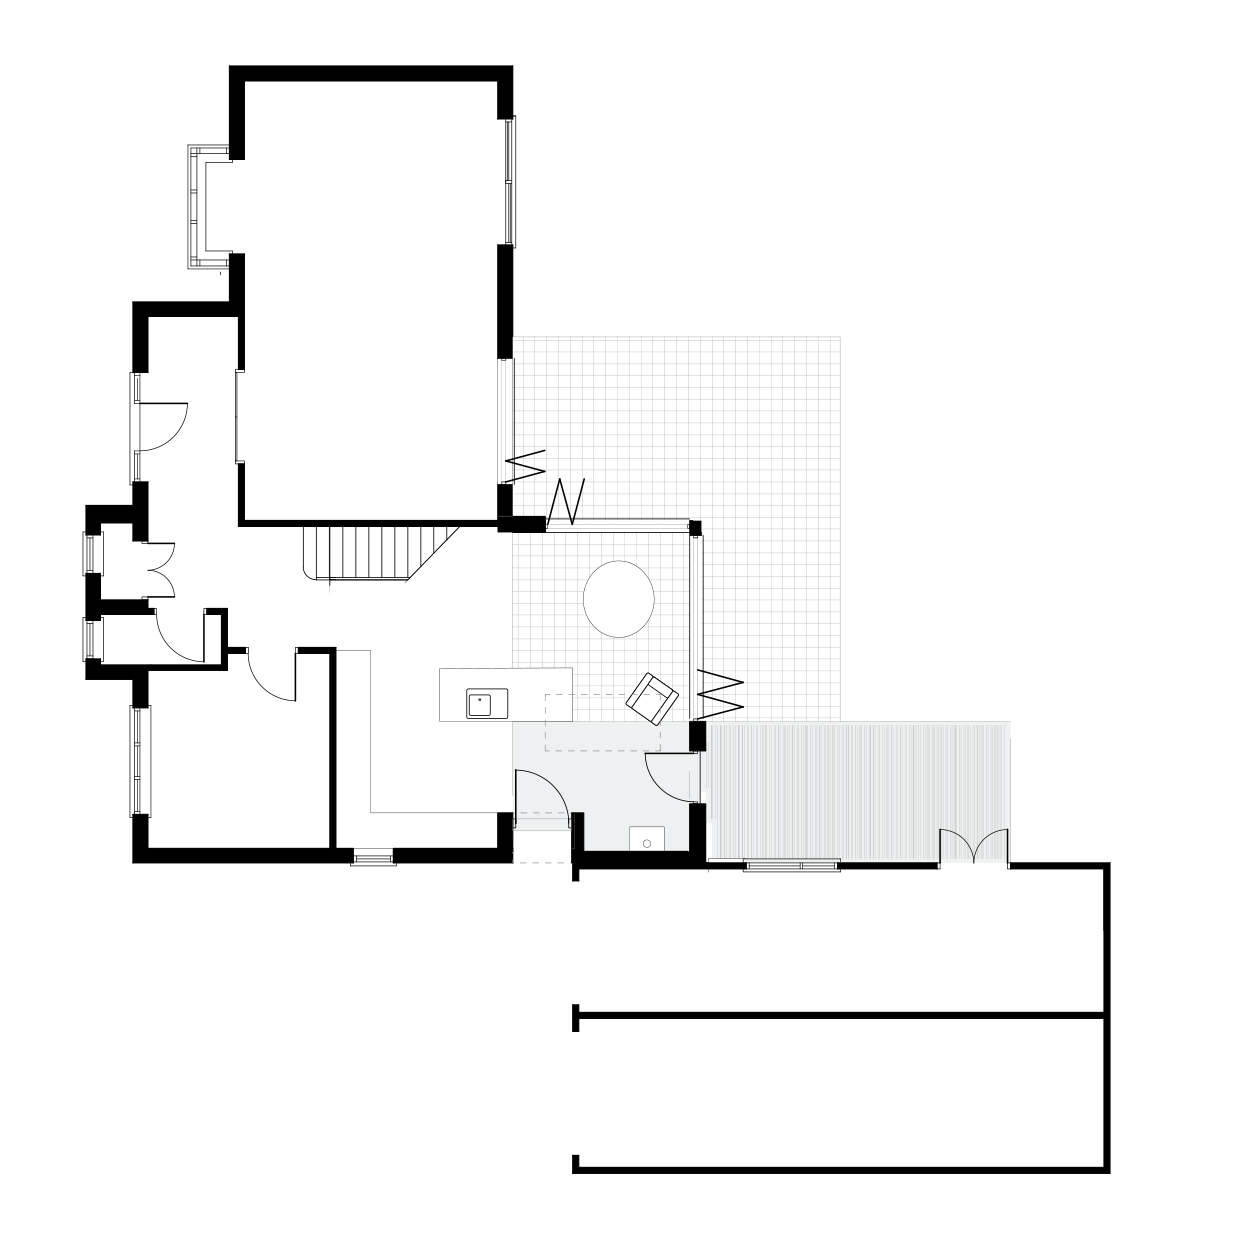 Drawn ground floor plan of the extension.